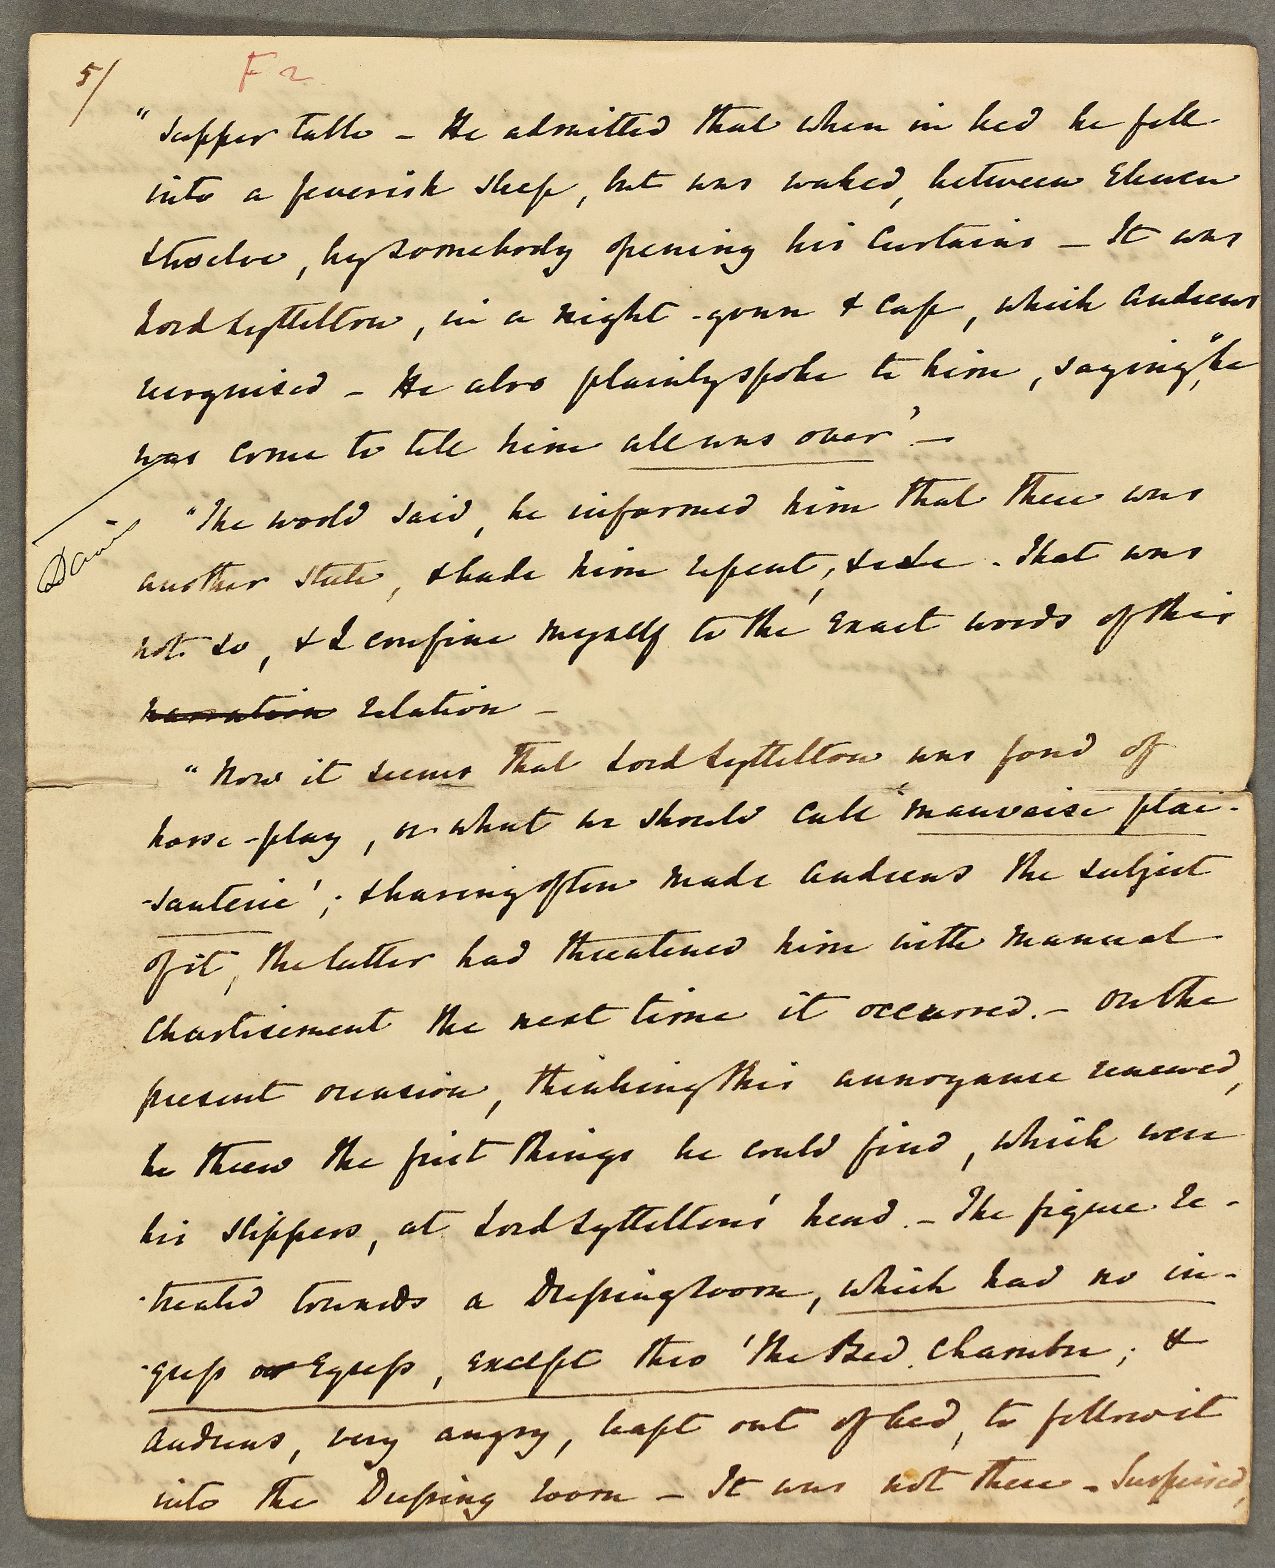 Page from Mr Andrews’ account of his encounter with Lord Lyttelton